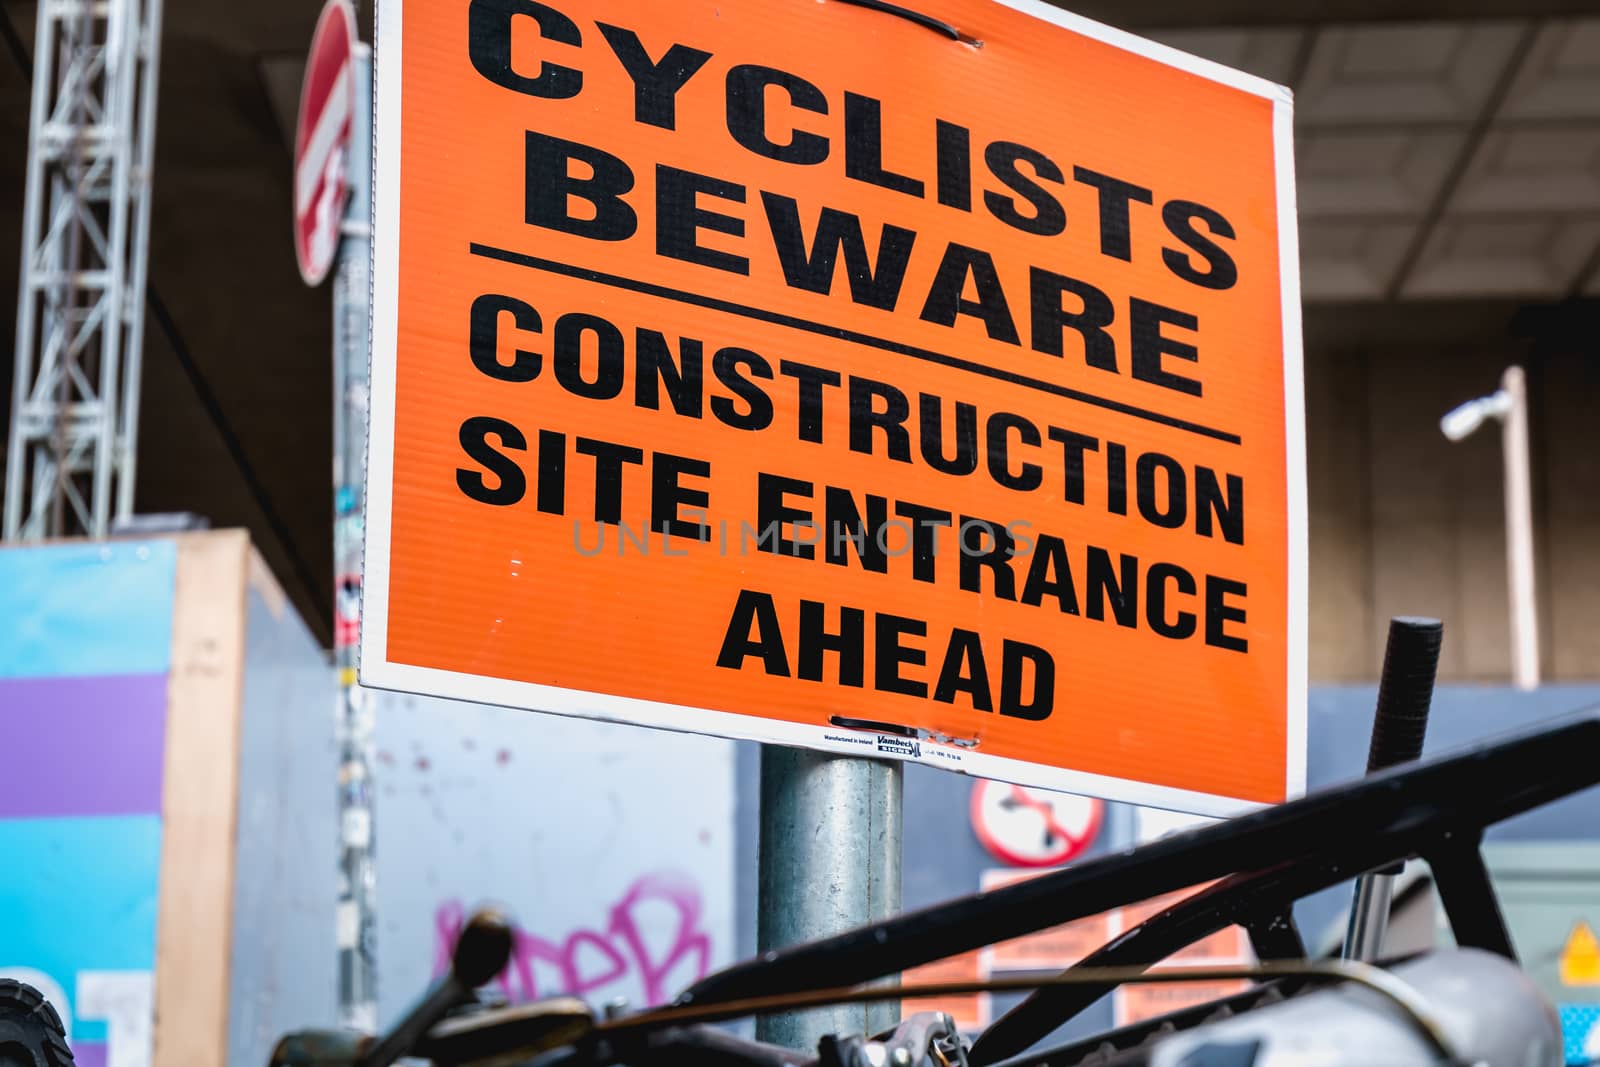 Dublin, Ireland - February 16, 2019: Cyclists Beware - Construction site entrance ahead - on a street sign in the city center on a winter day